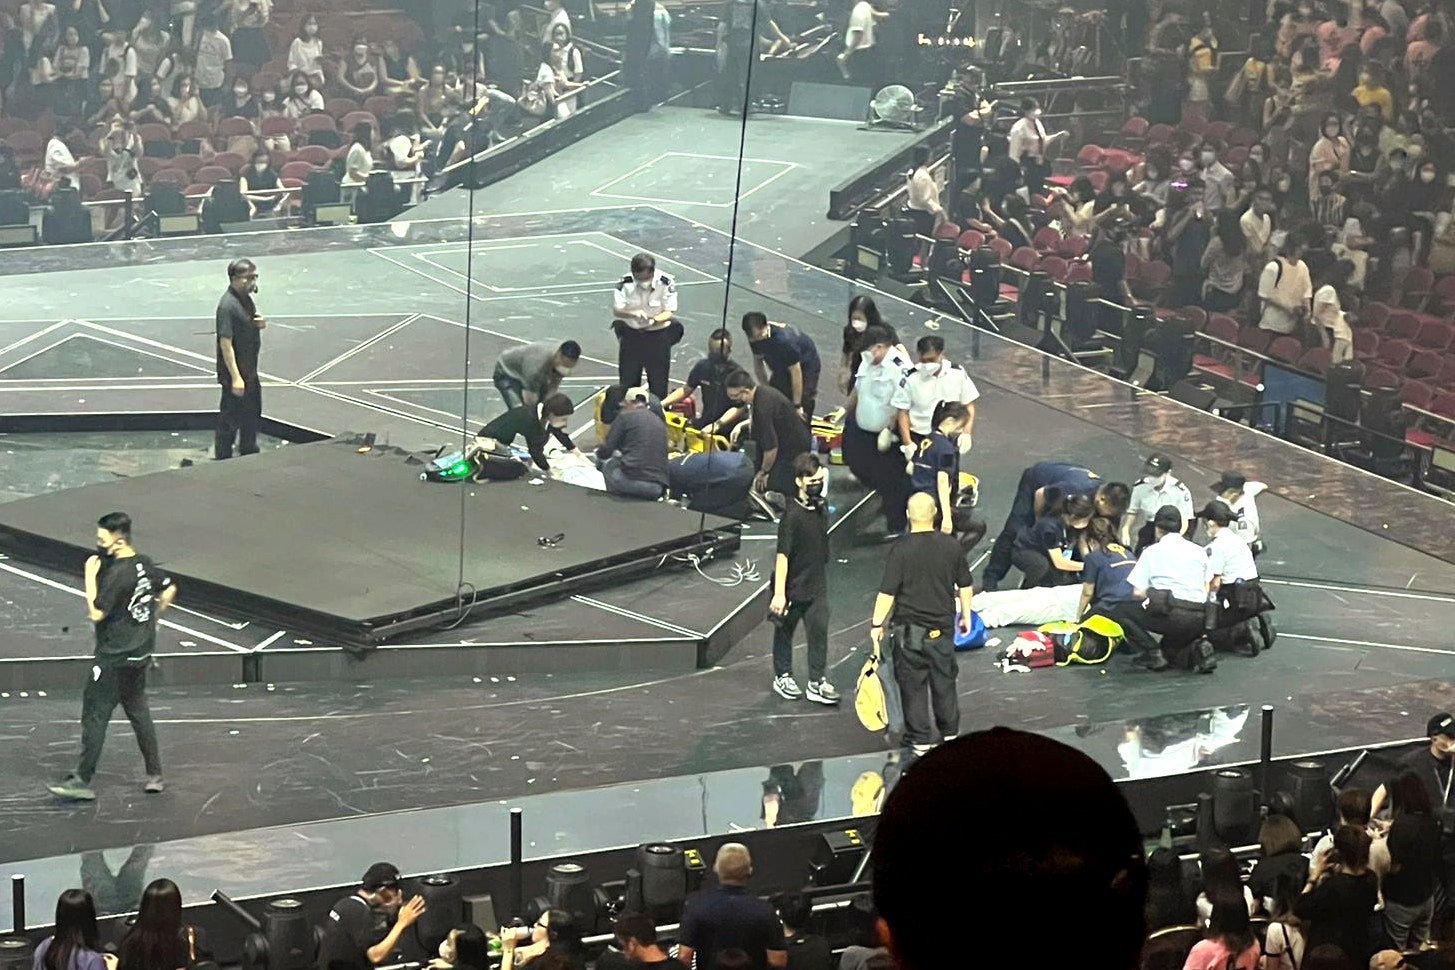 Hong Kong authorities to investigate after massive screen falls during concert, injures dancers